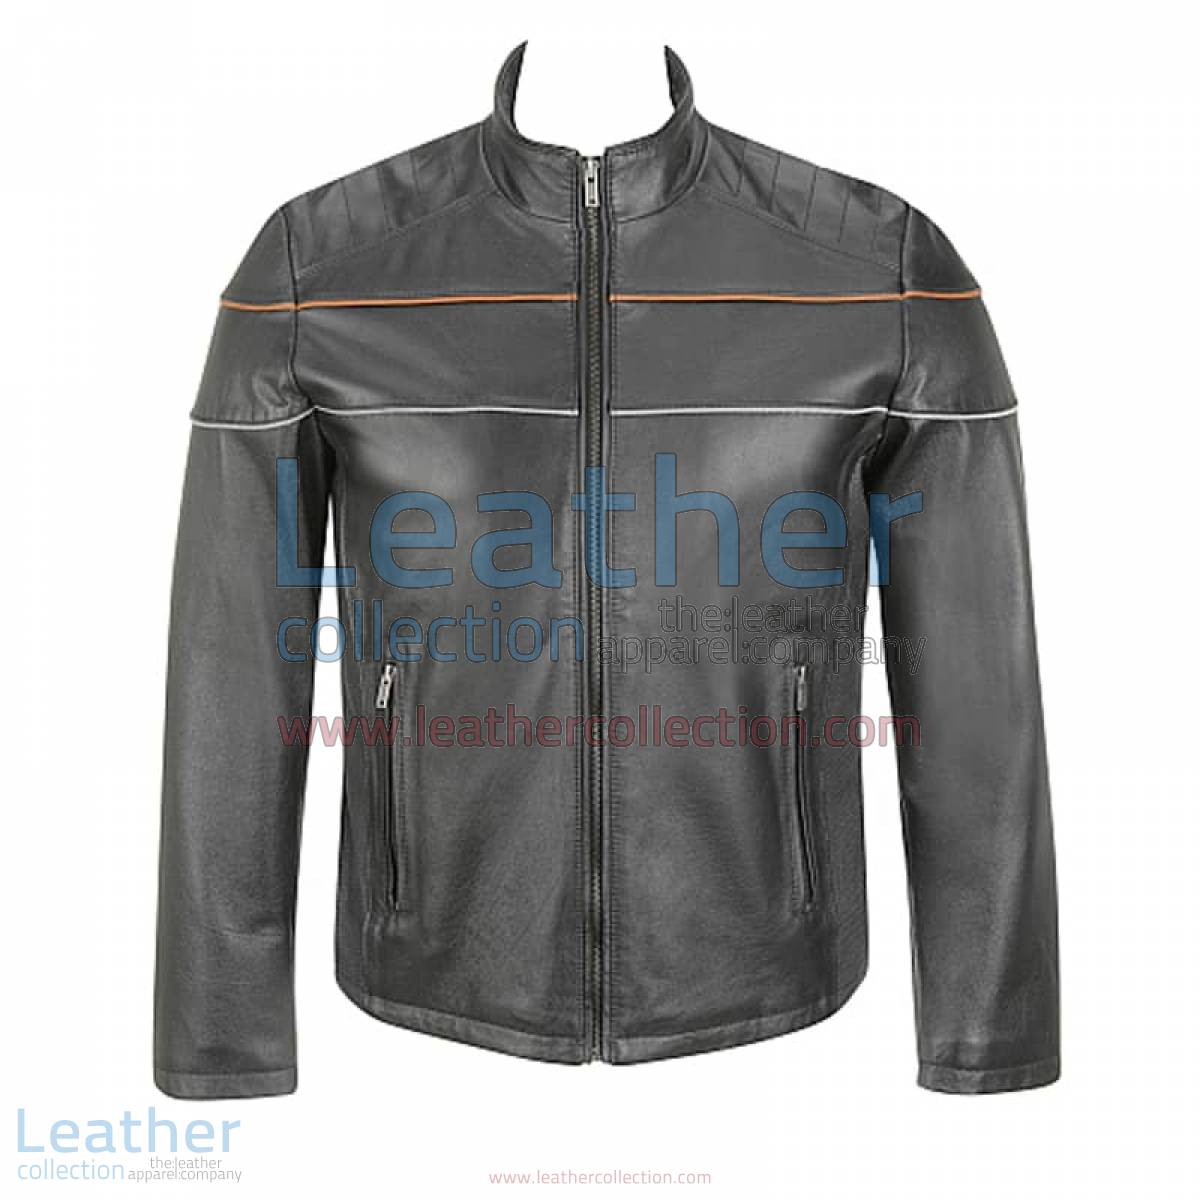 Leather Moto Jacket with Piping on Chest | leather moto jacket